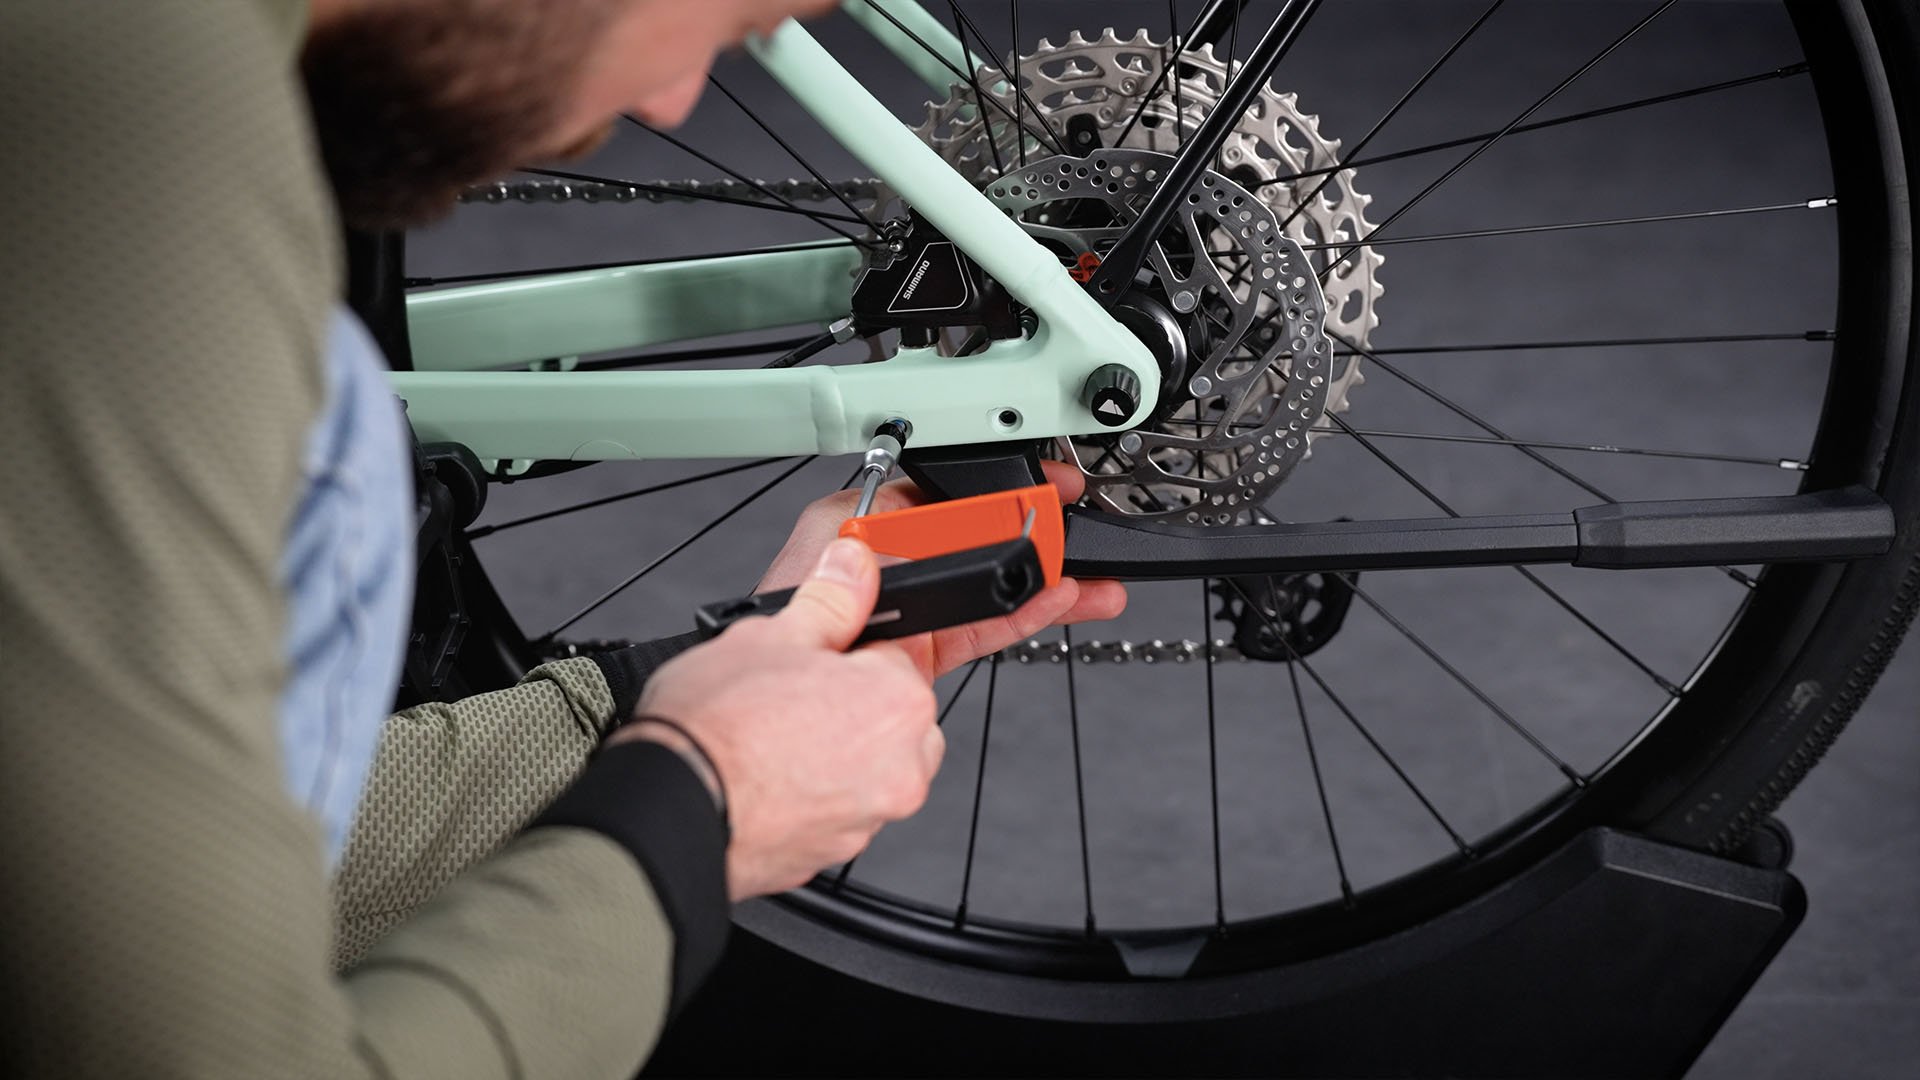 Install a kick stand on your Commuter:ON